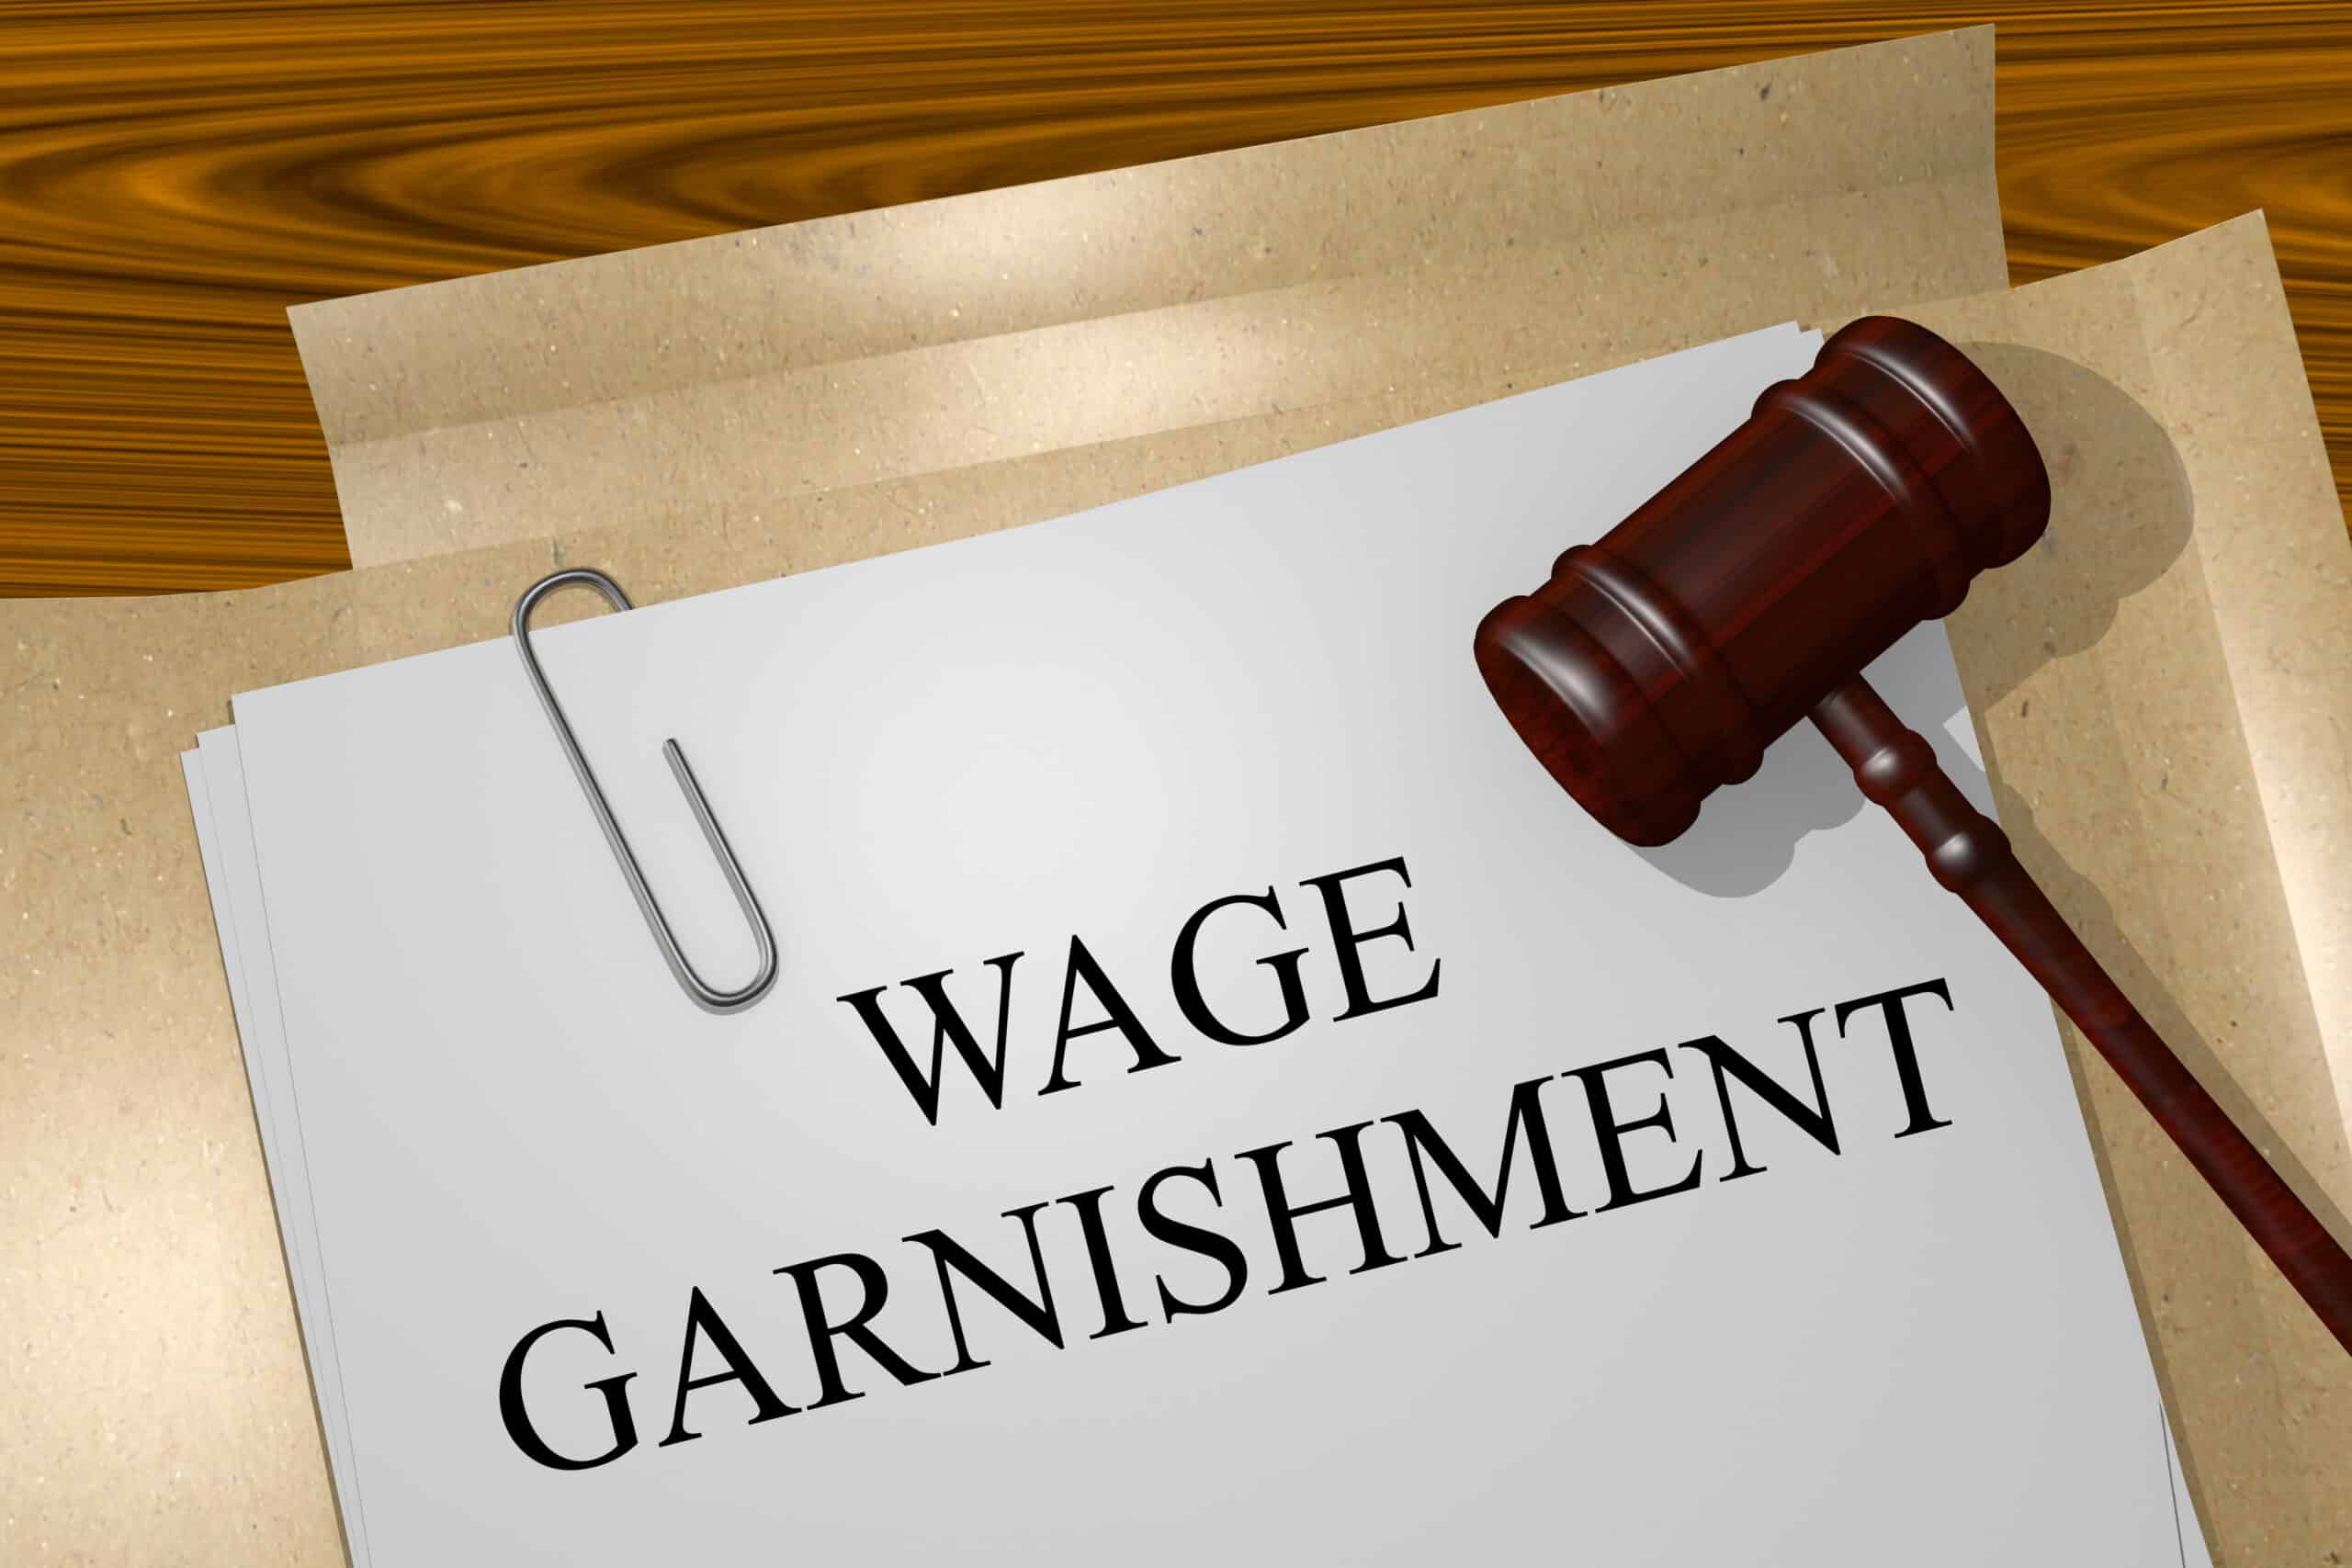 Wage garnishment on a piece of paper with a gavel.